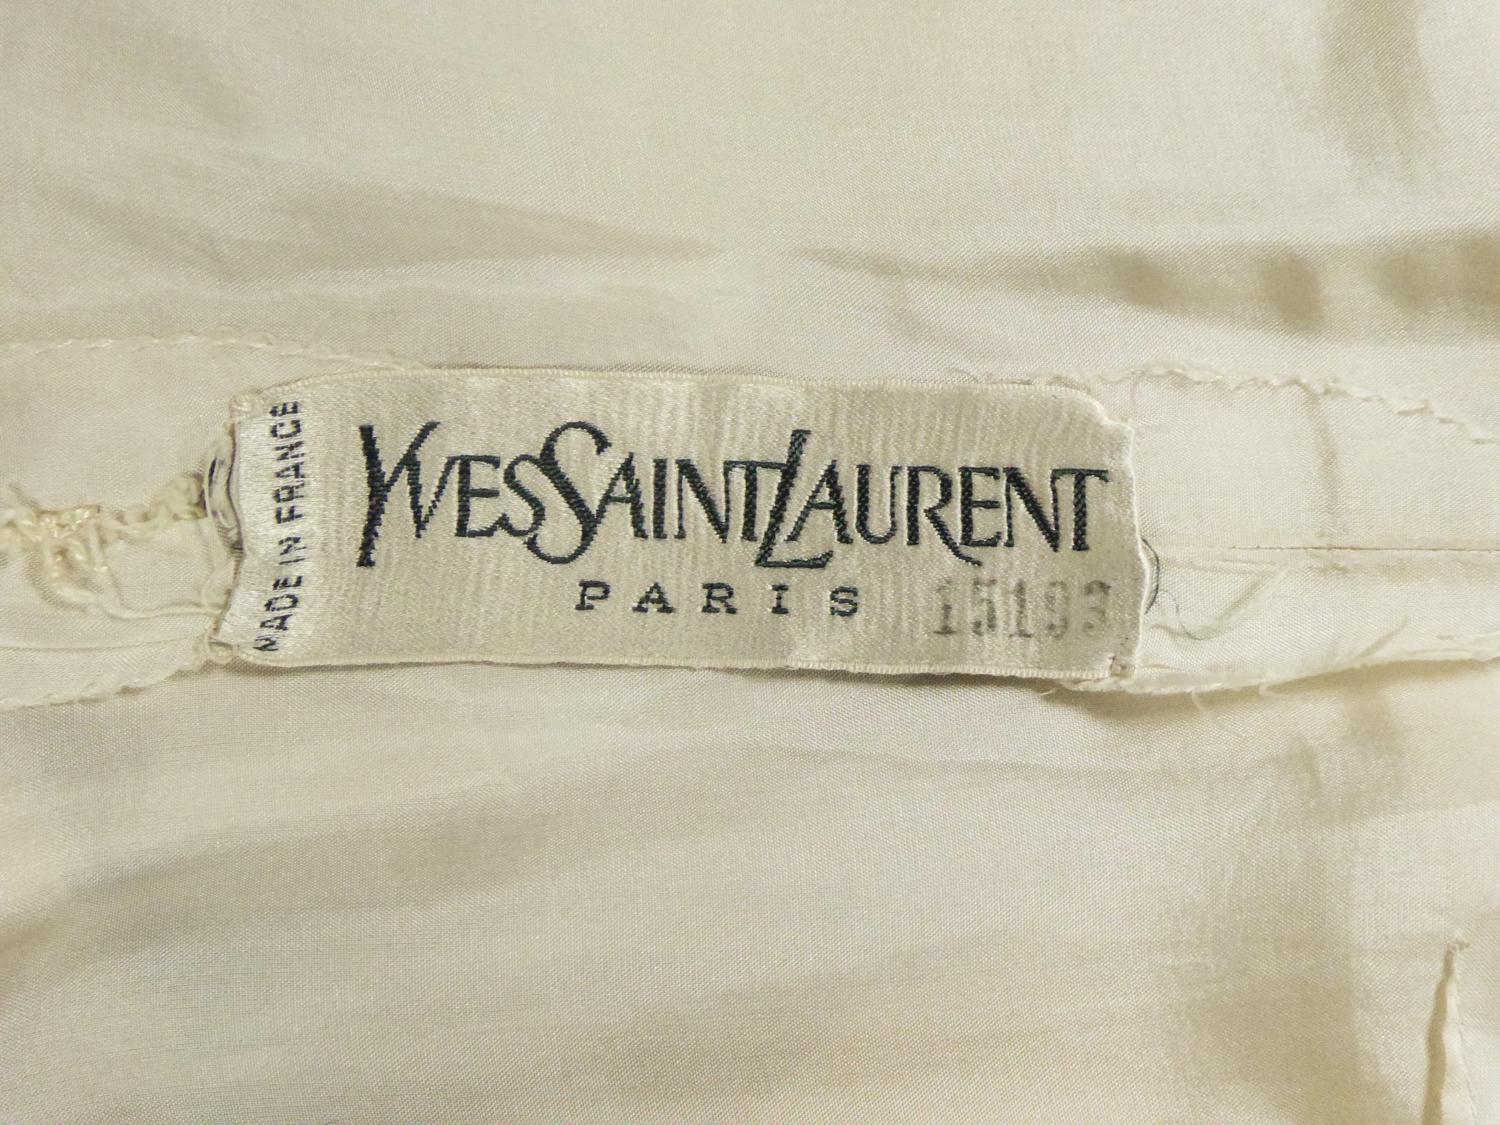 Beige An Yves Saint Laurent Cocktail Dress Numbered 15193 - 1965 Collection